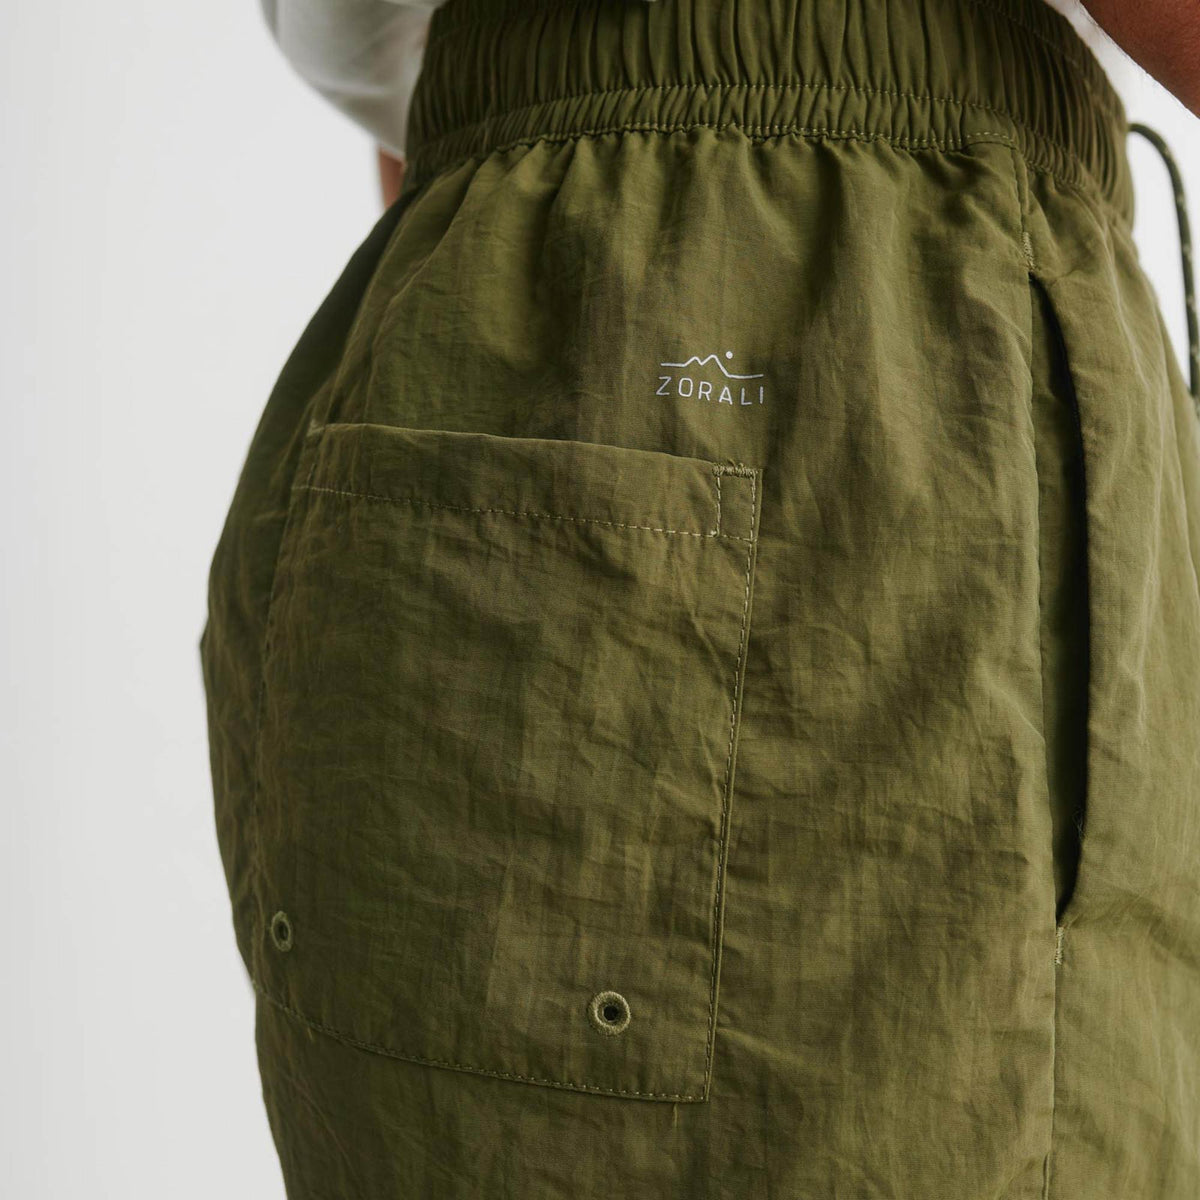 Womens Recycled Short Olive